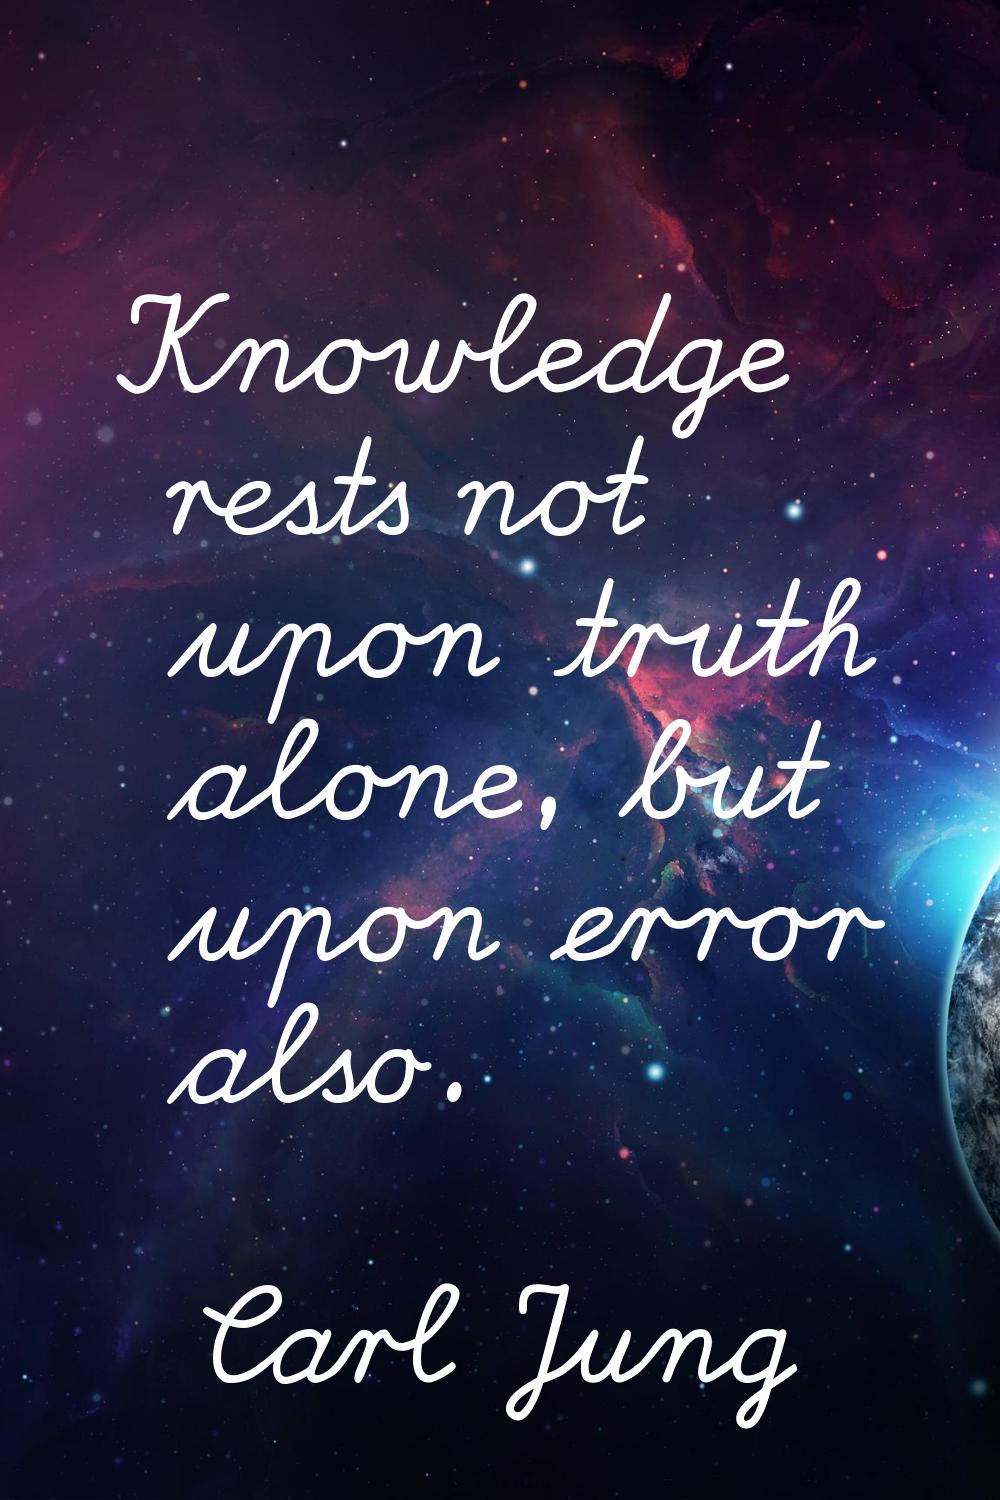 Knowledge rests not upon truth alone, but upon error also.